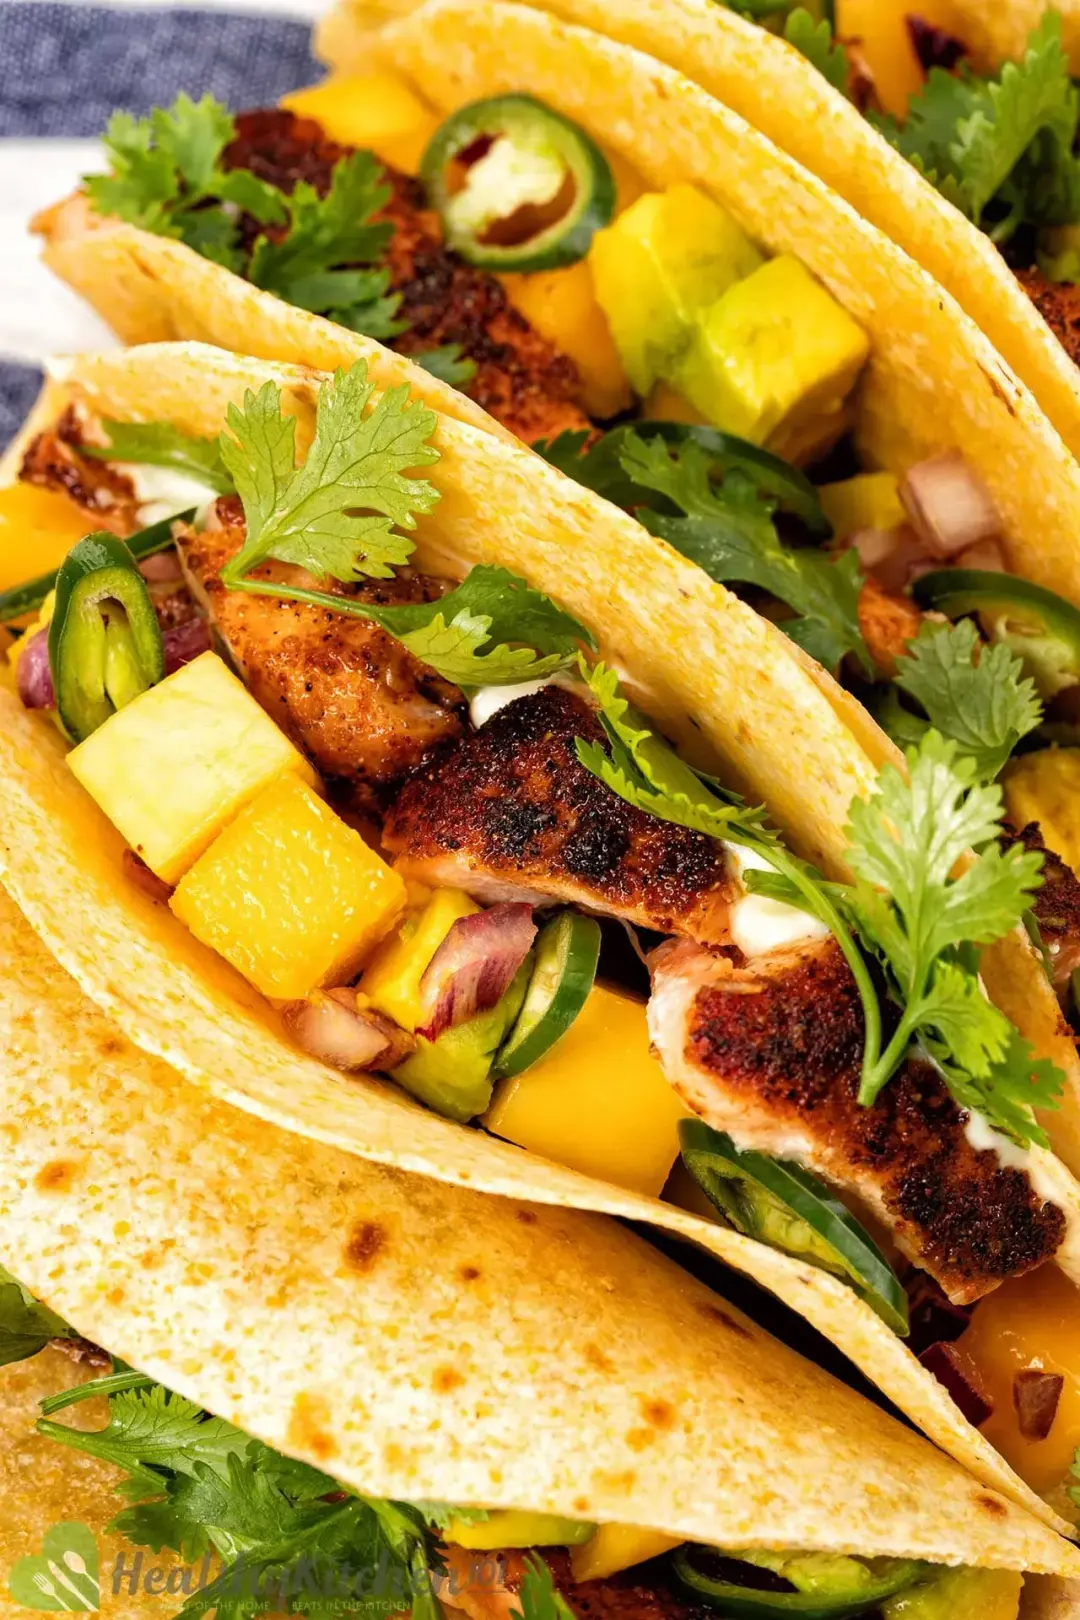 A close up picture of some blackened salmon tacos with blackened pieces of salmon, avocado cubes, and mango cubes inside crispy tortillas topped with fresh parsley.